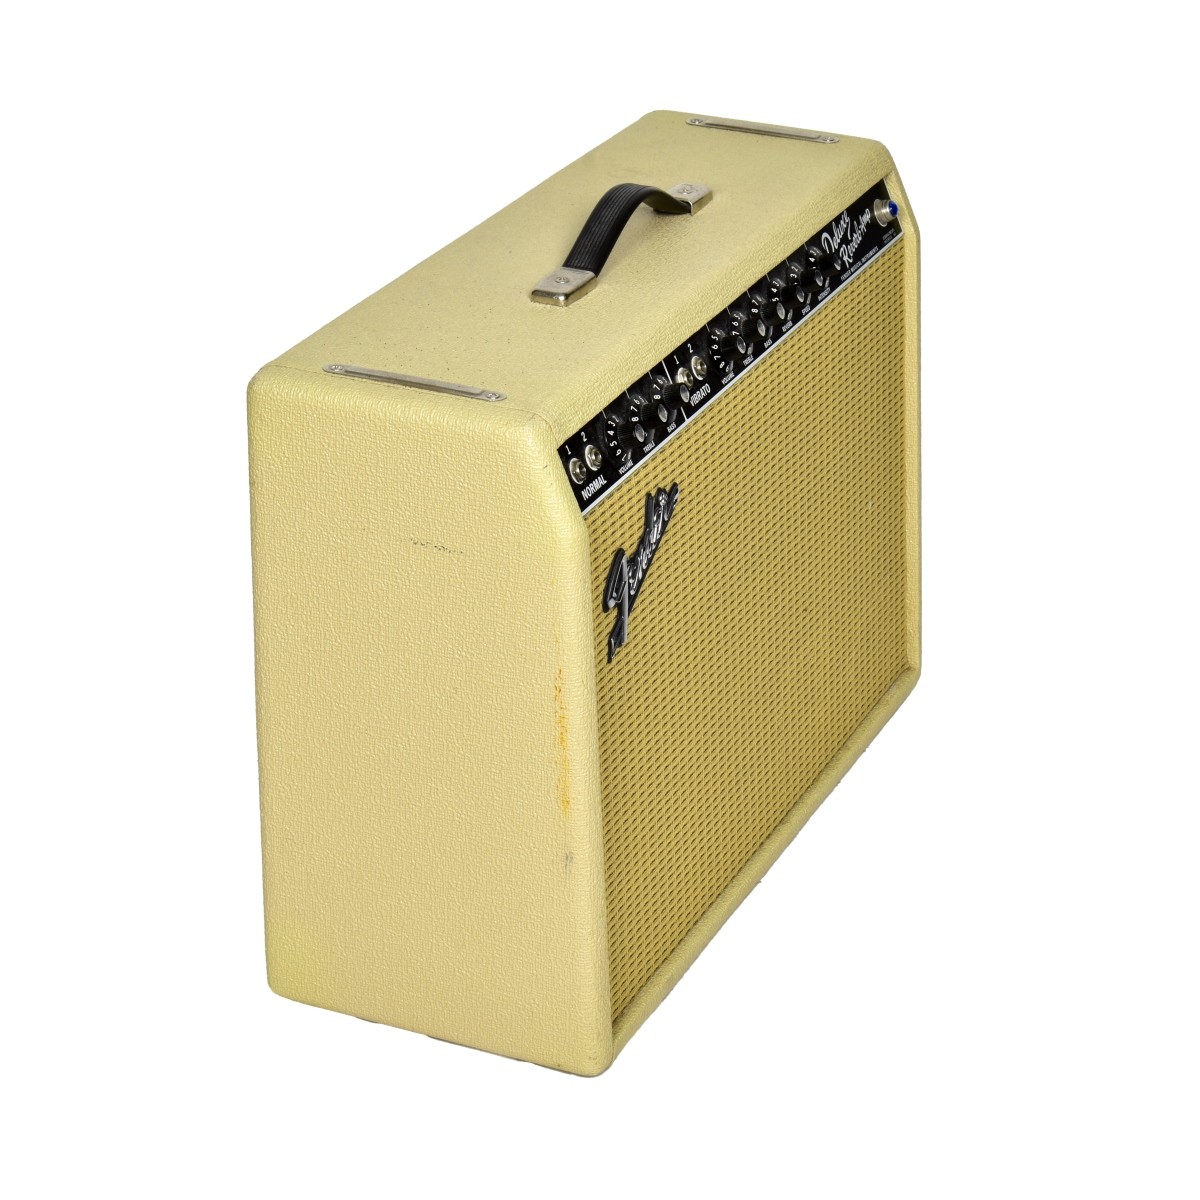 Limited Edition Fender Deluxe Reverb Amp